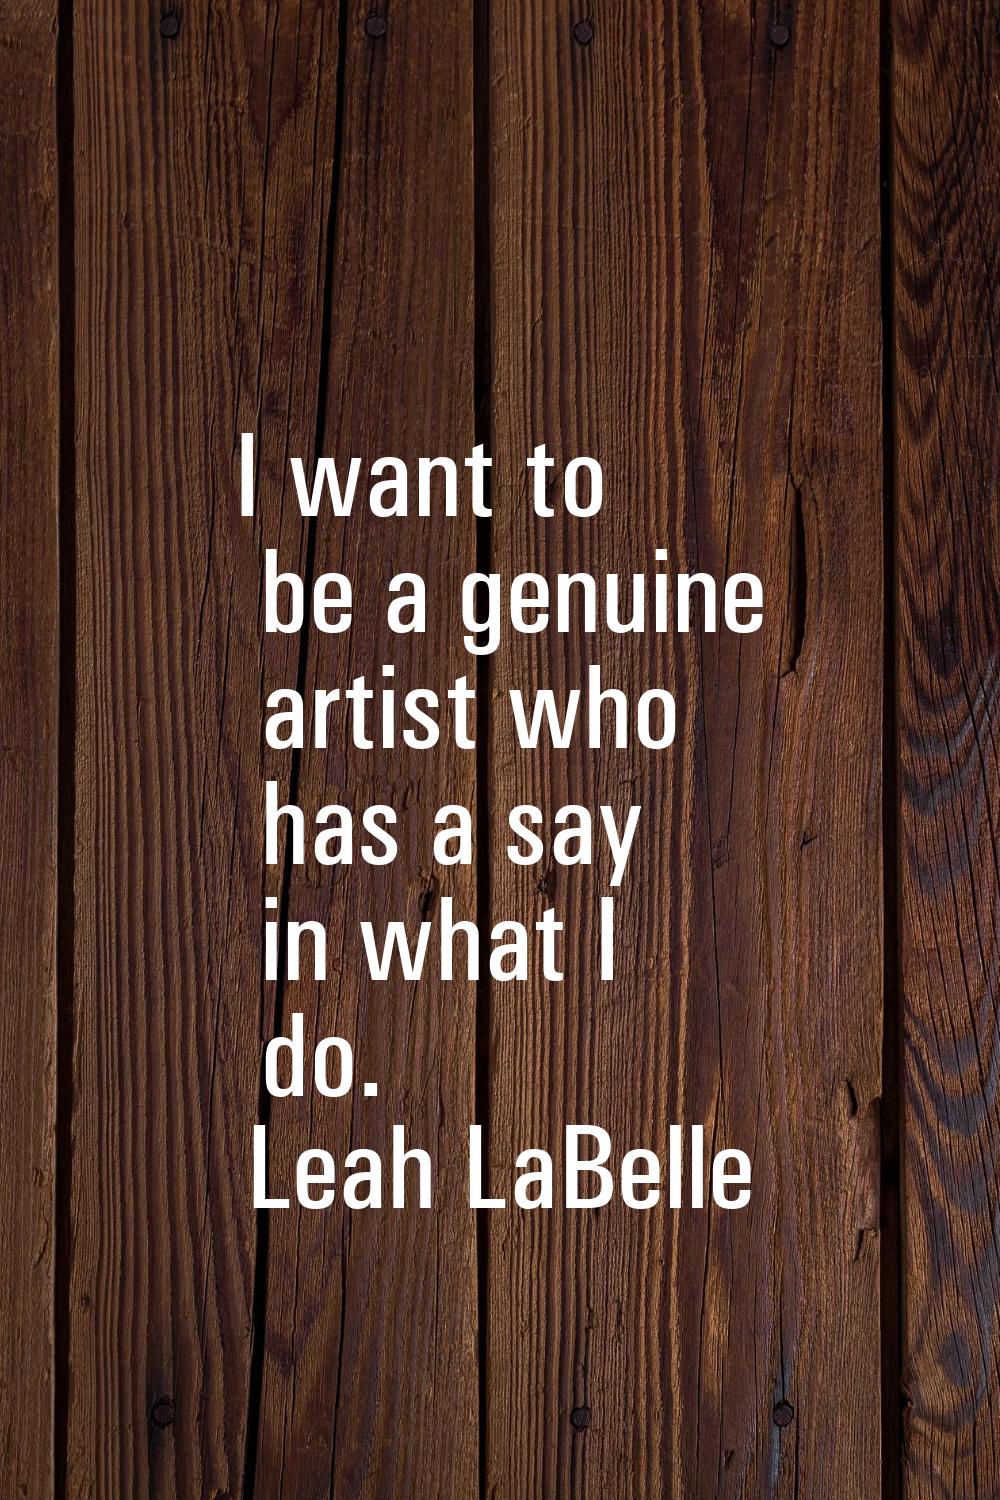 I want to be a genuine artist who has a say in what I do.